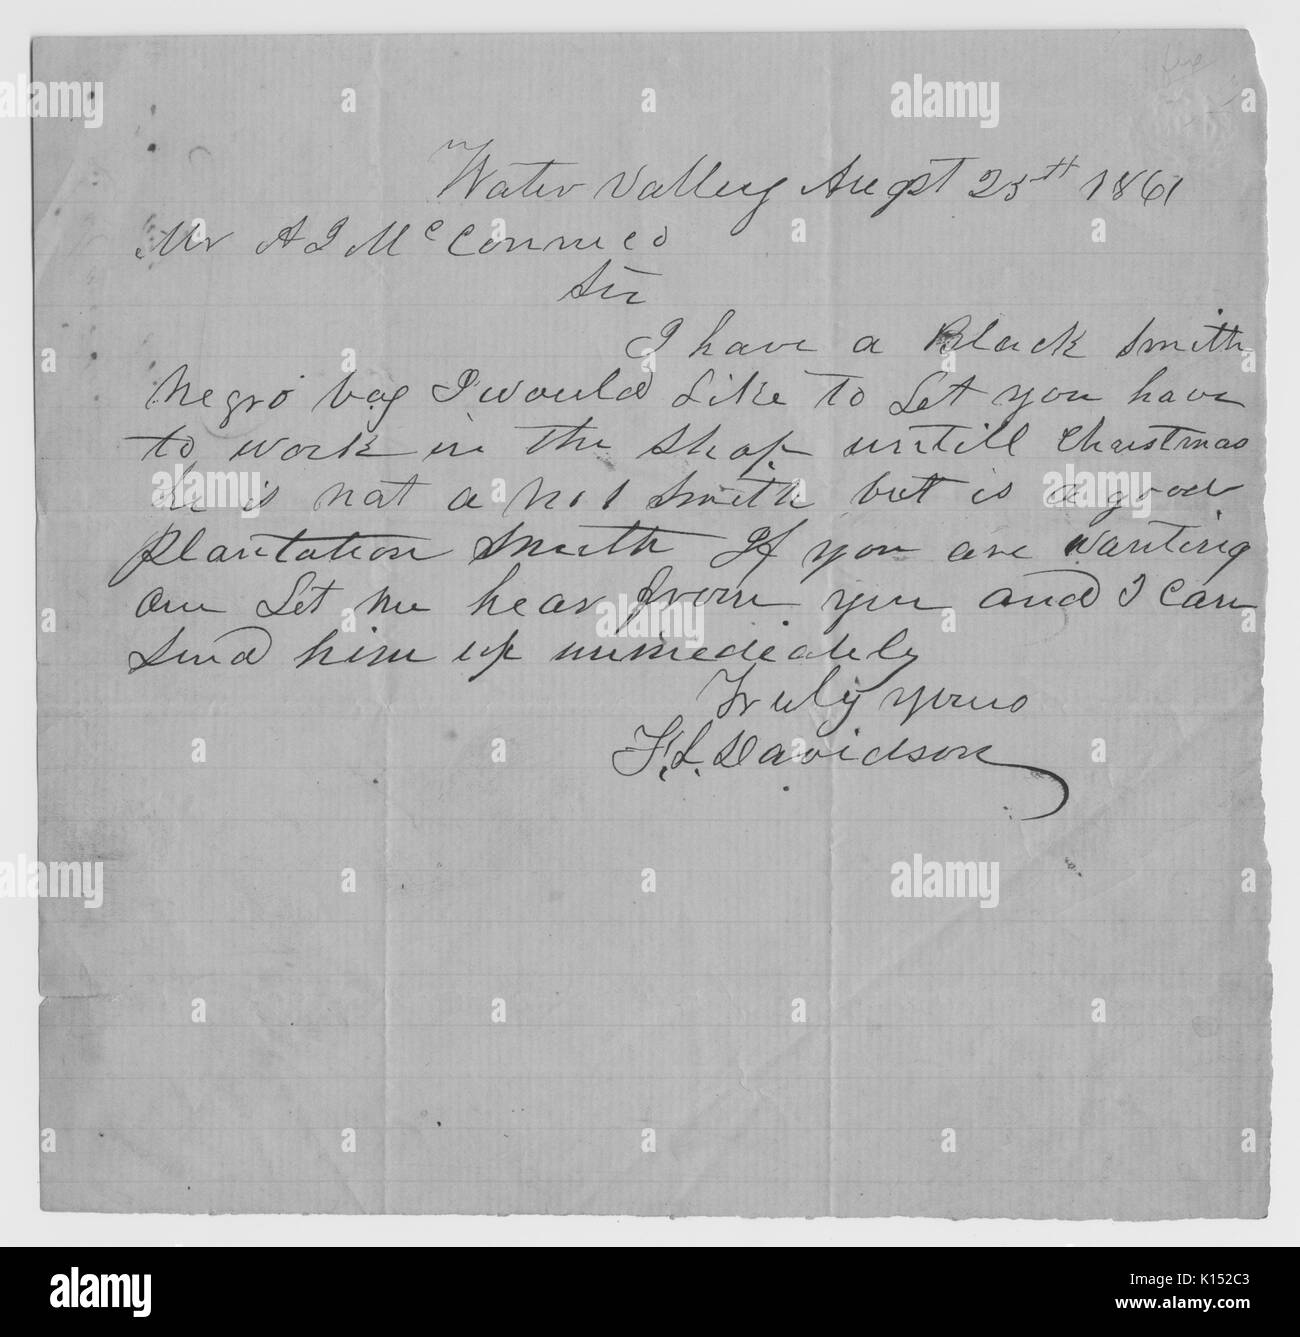 A letter from FL Davidson offering his slave for hire, who he says is a blacksmith and a good plantation worker, 1861. From the New York Public Library. Stock Photo